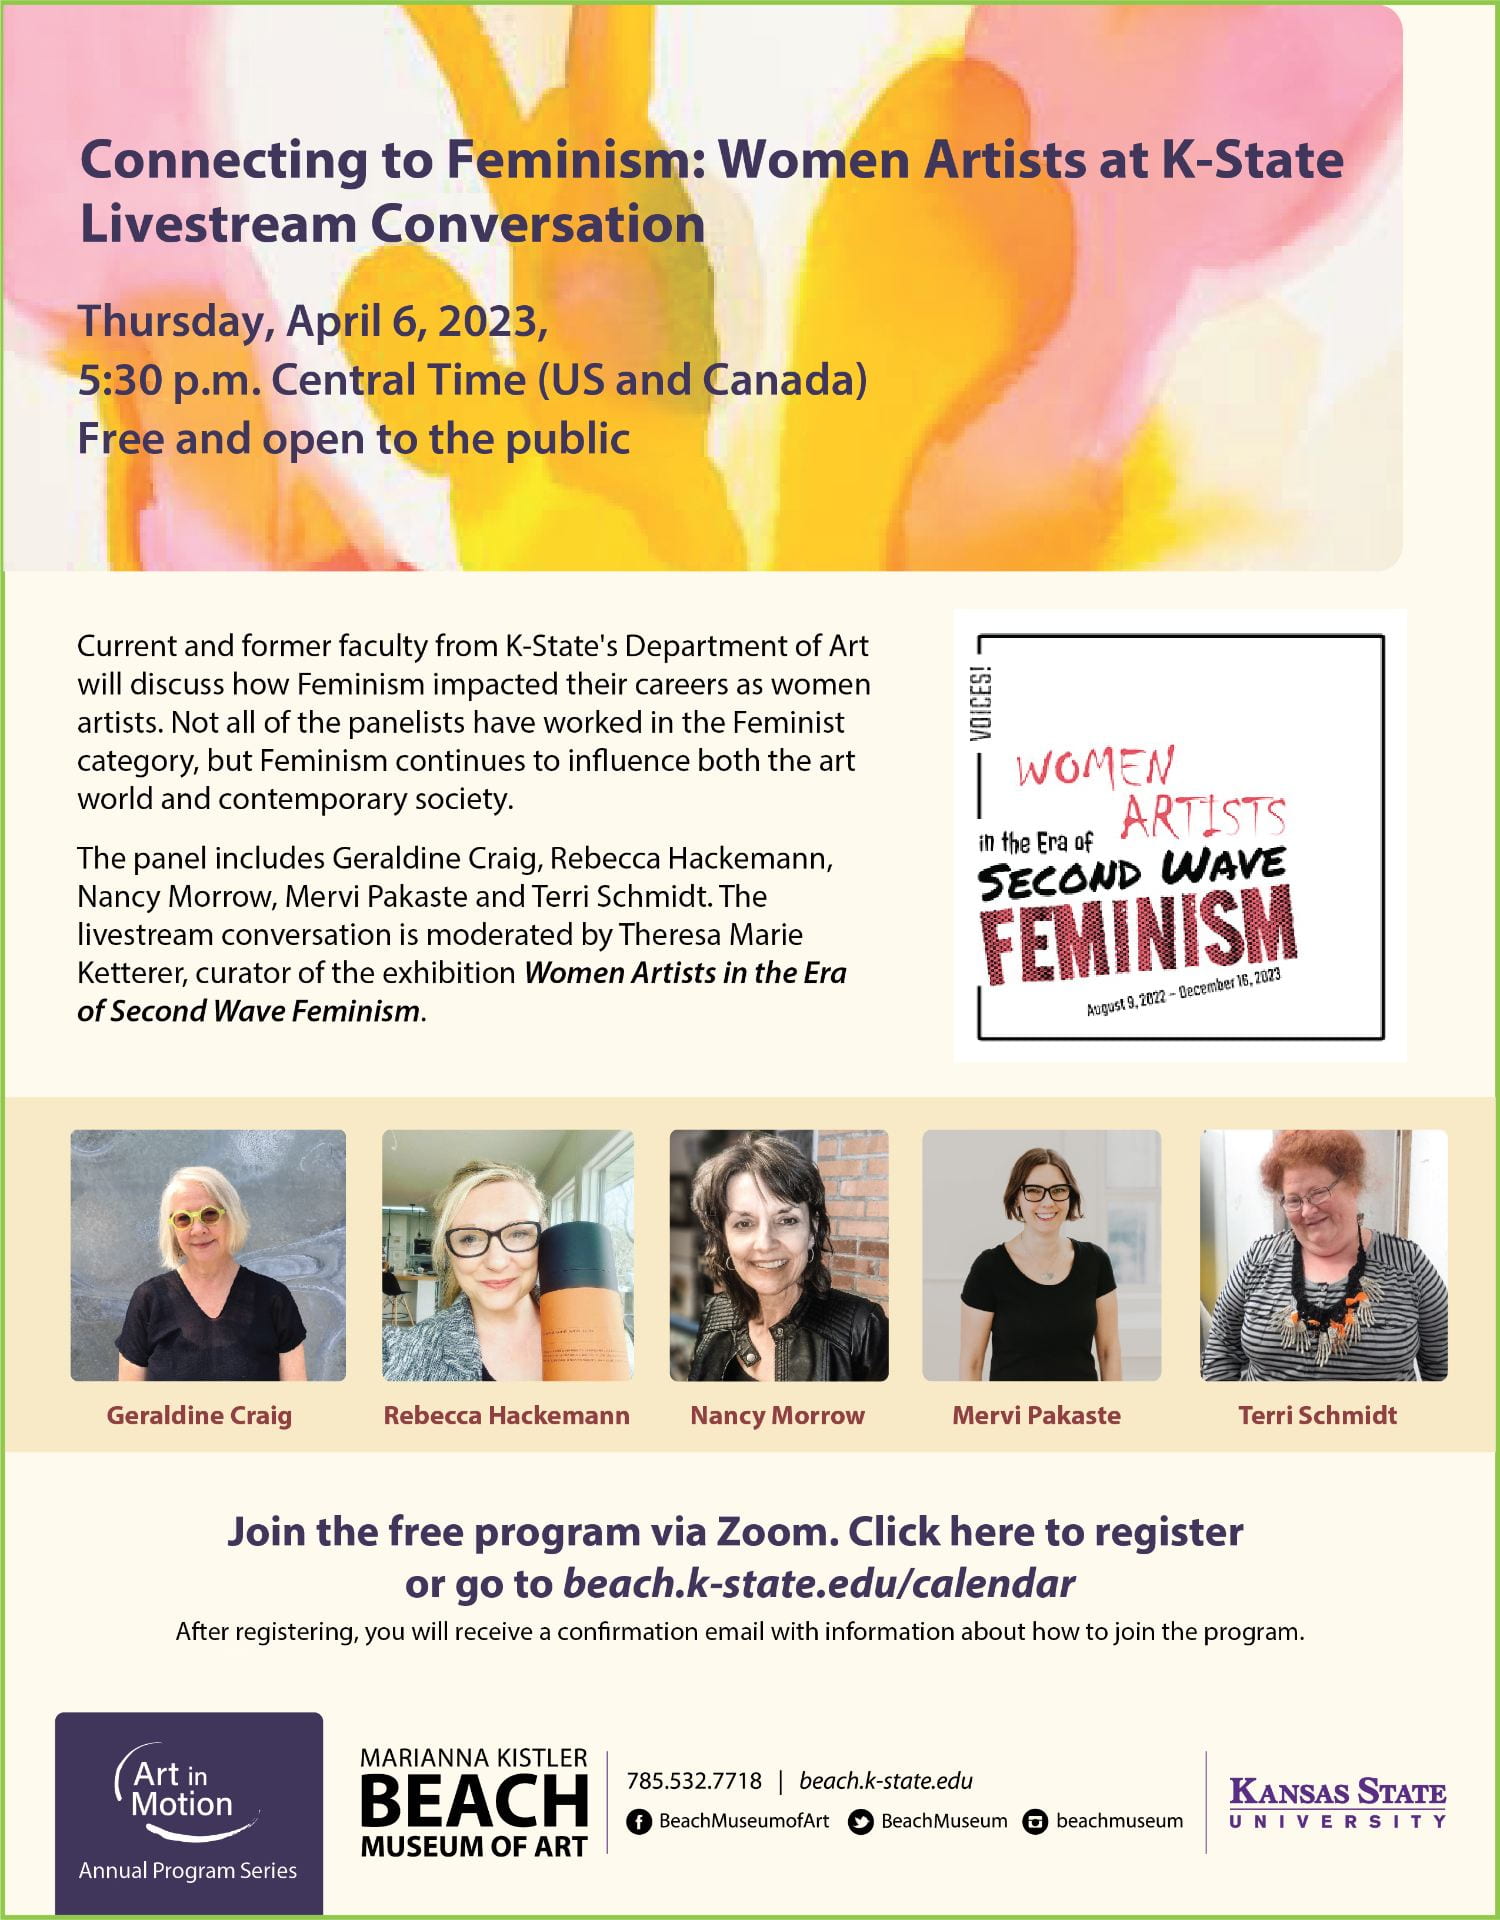 Flyer for the livestream conversation "Connecting to Feminism: Women Artists at K-State" April 6, 2023. beach.k-state.edu/calendar